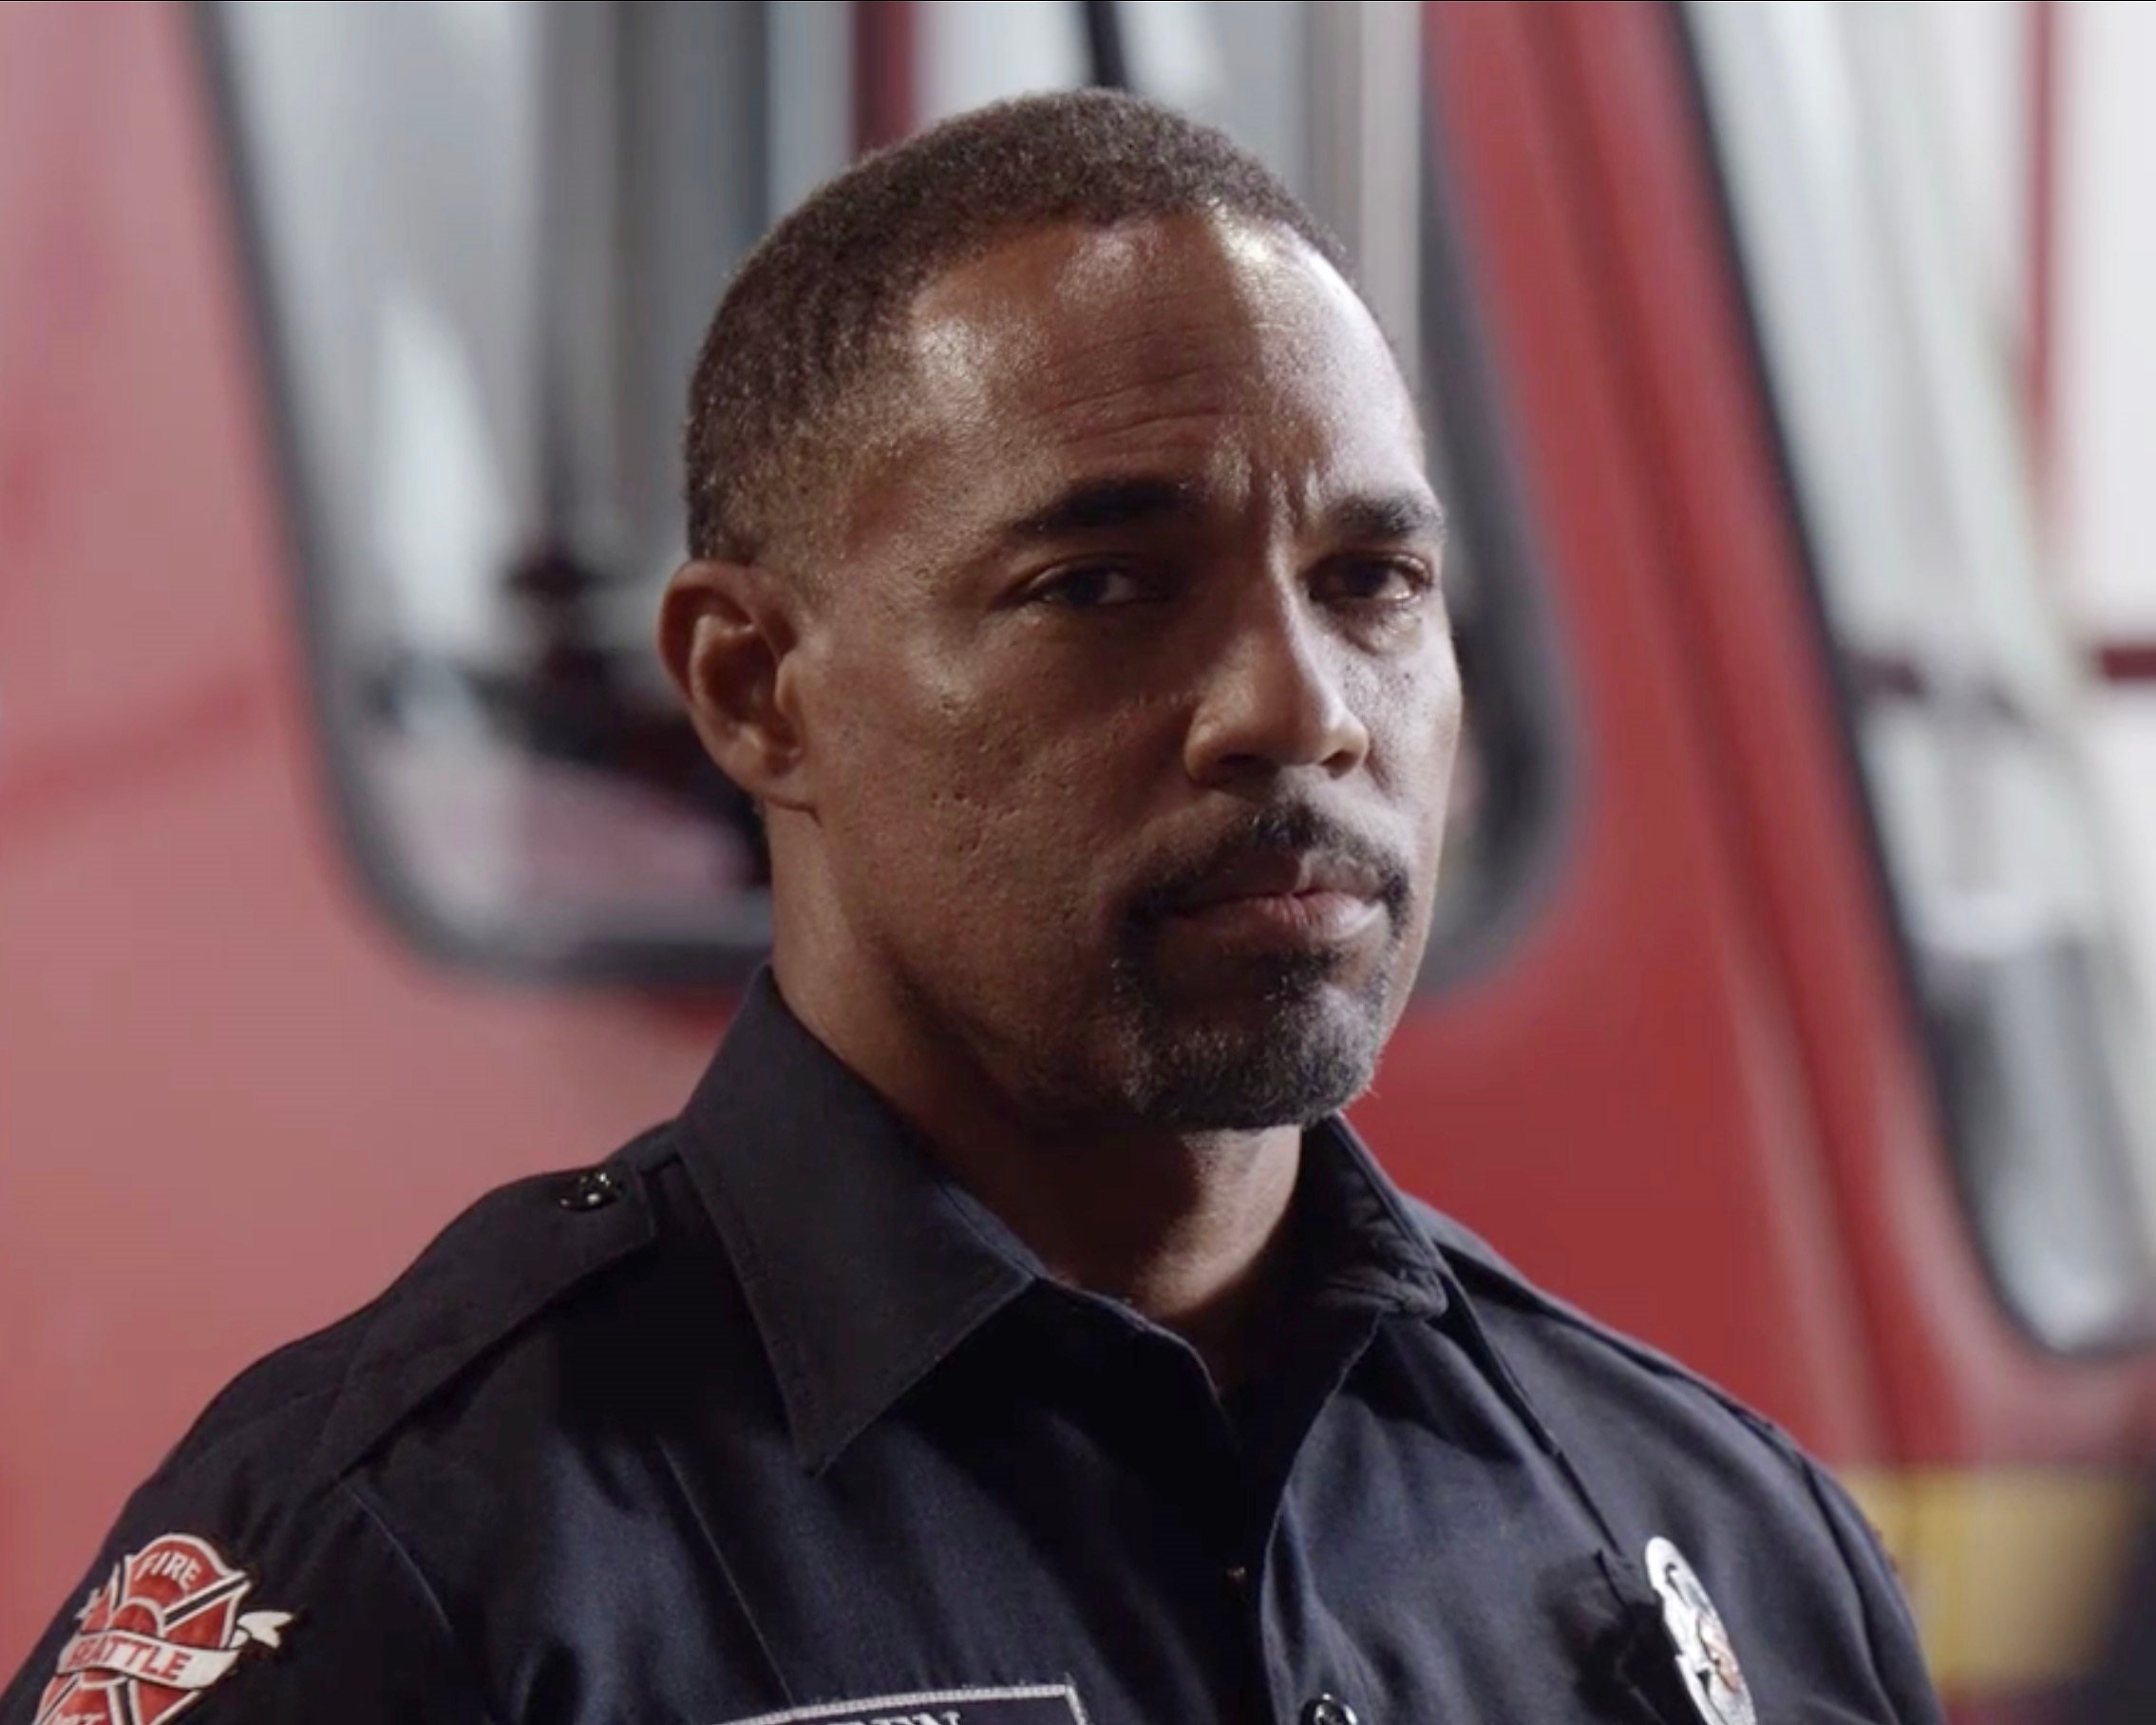 Jason George looking at the camera as Ben Warren from 'Station 19'